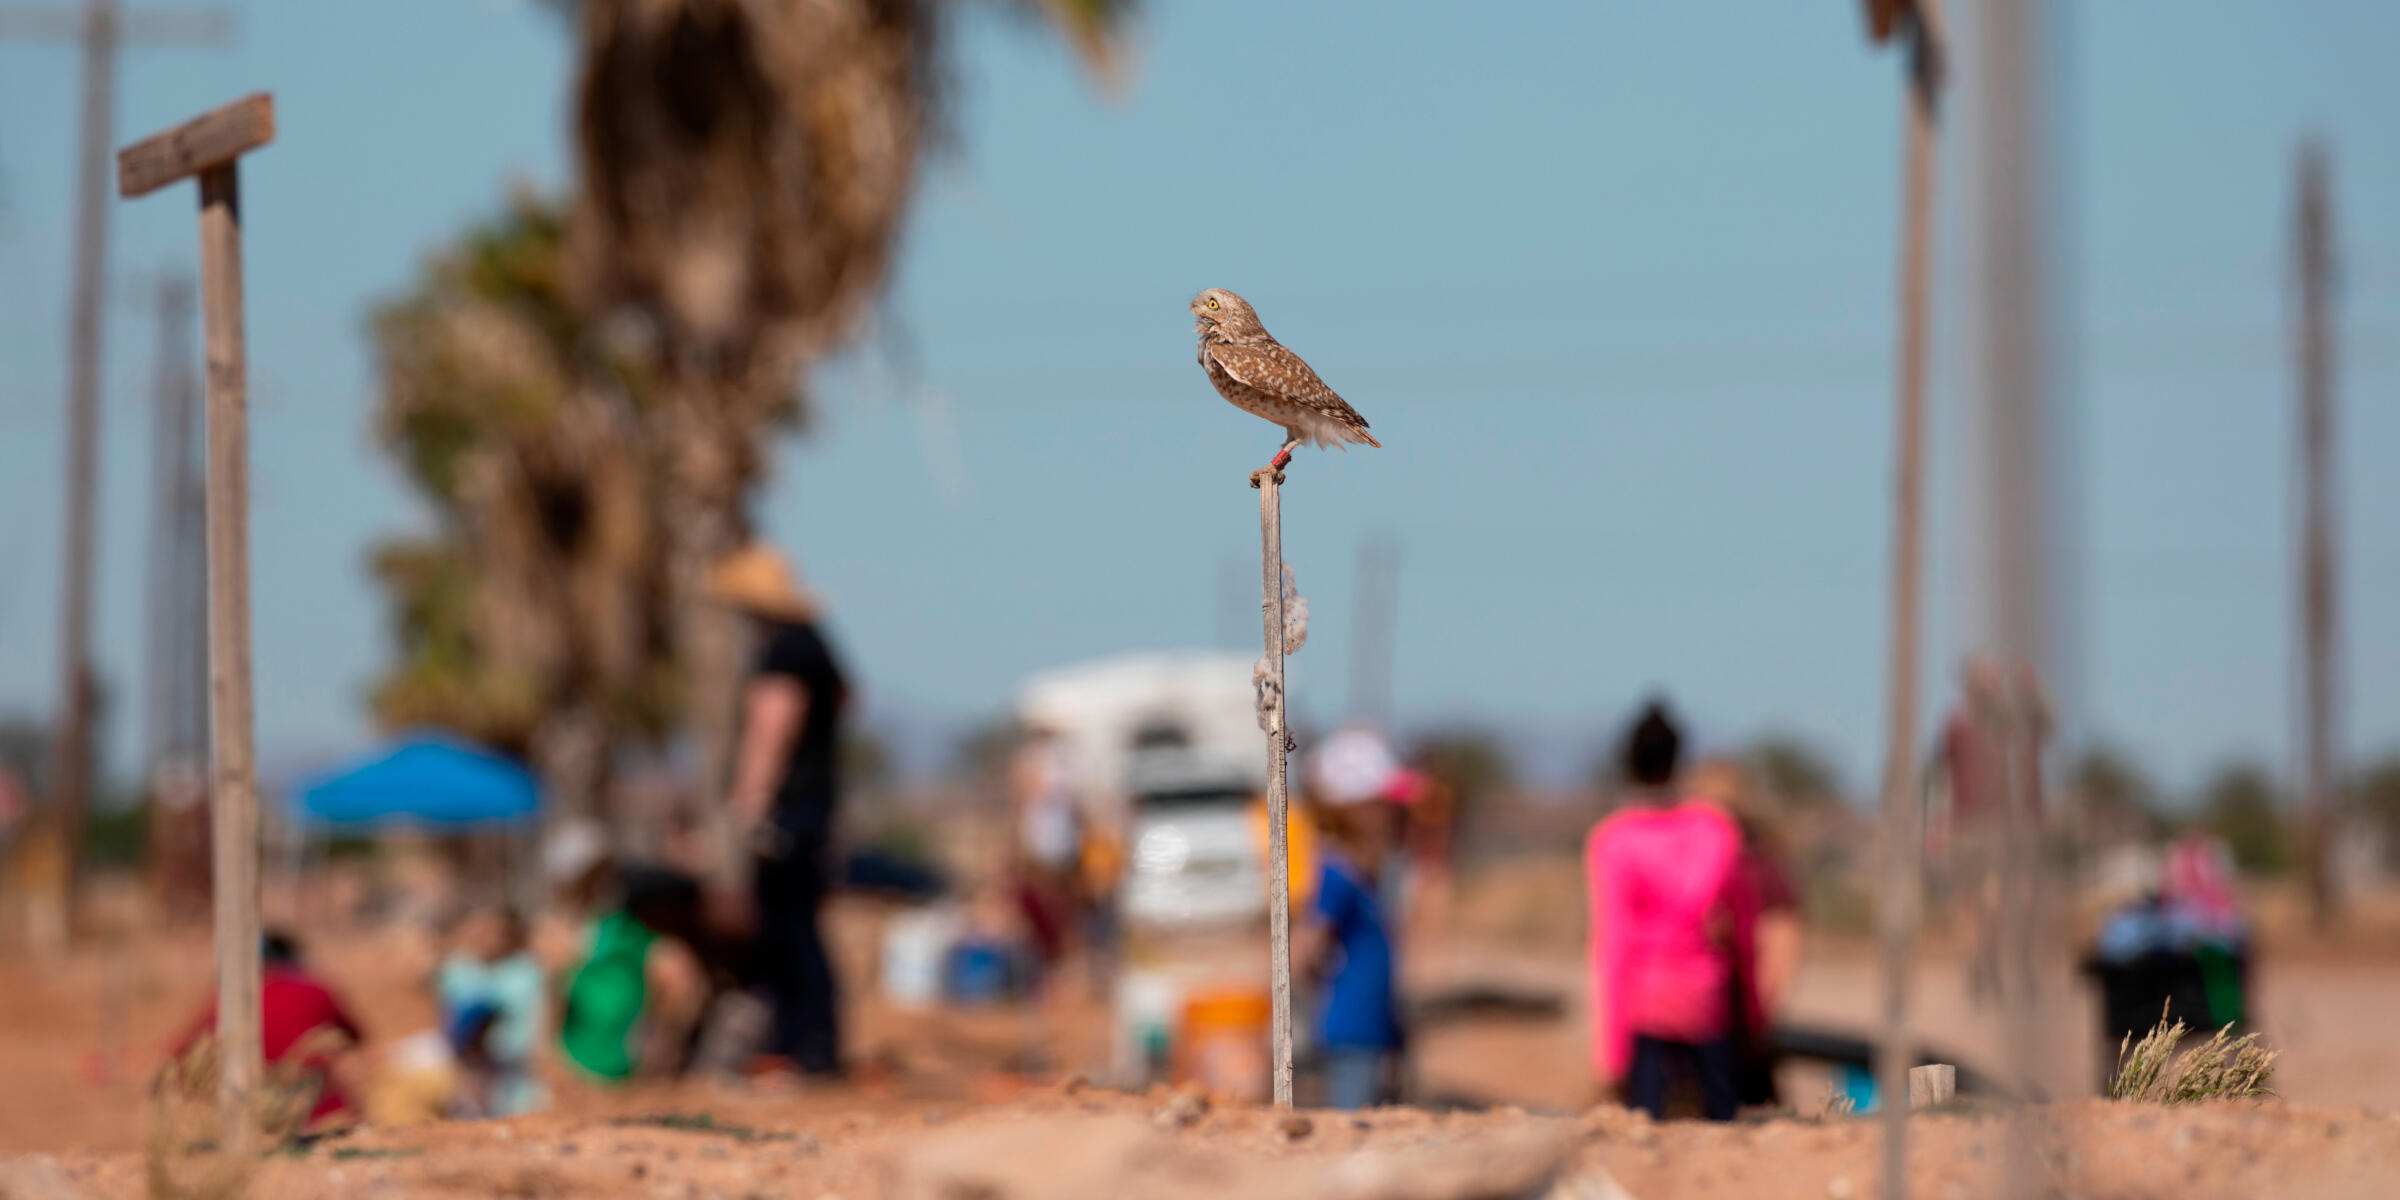 Staff with Audubon, Wild at Heart raptor rescue, and volunteers construct artificial burrows for the native Burrowing Owl population in Arizona.